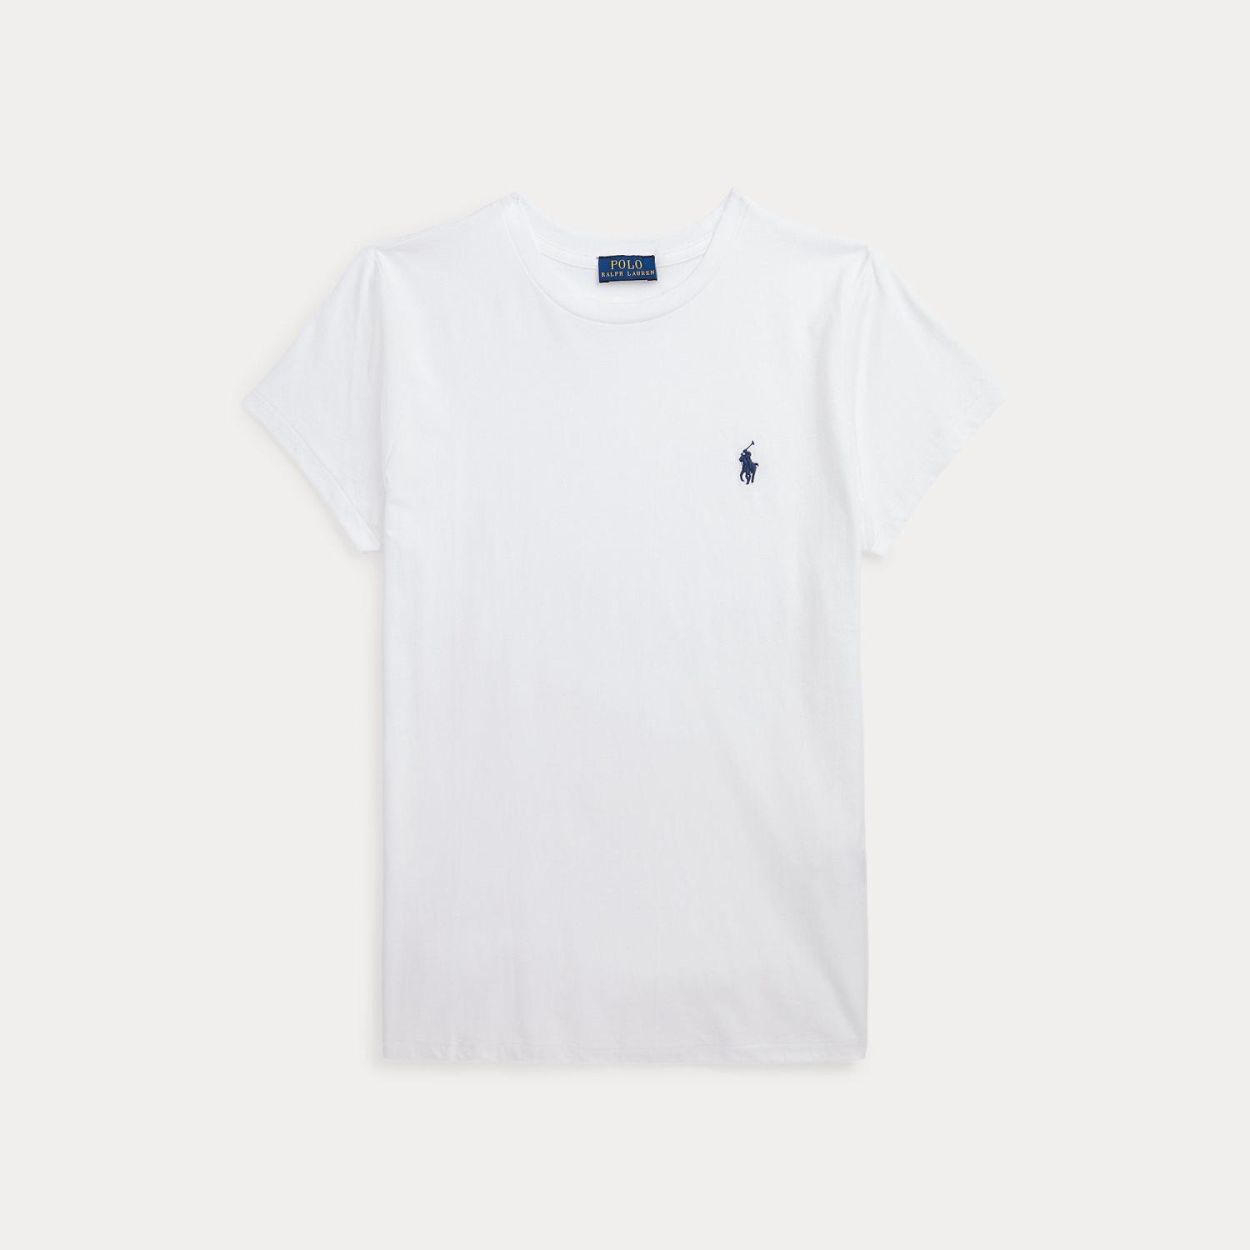 Ralph Lauren T-shirt Wit  (211898698005/white) - Corylie (Roeselare)